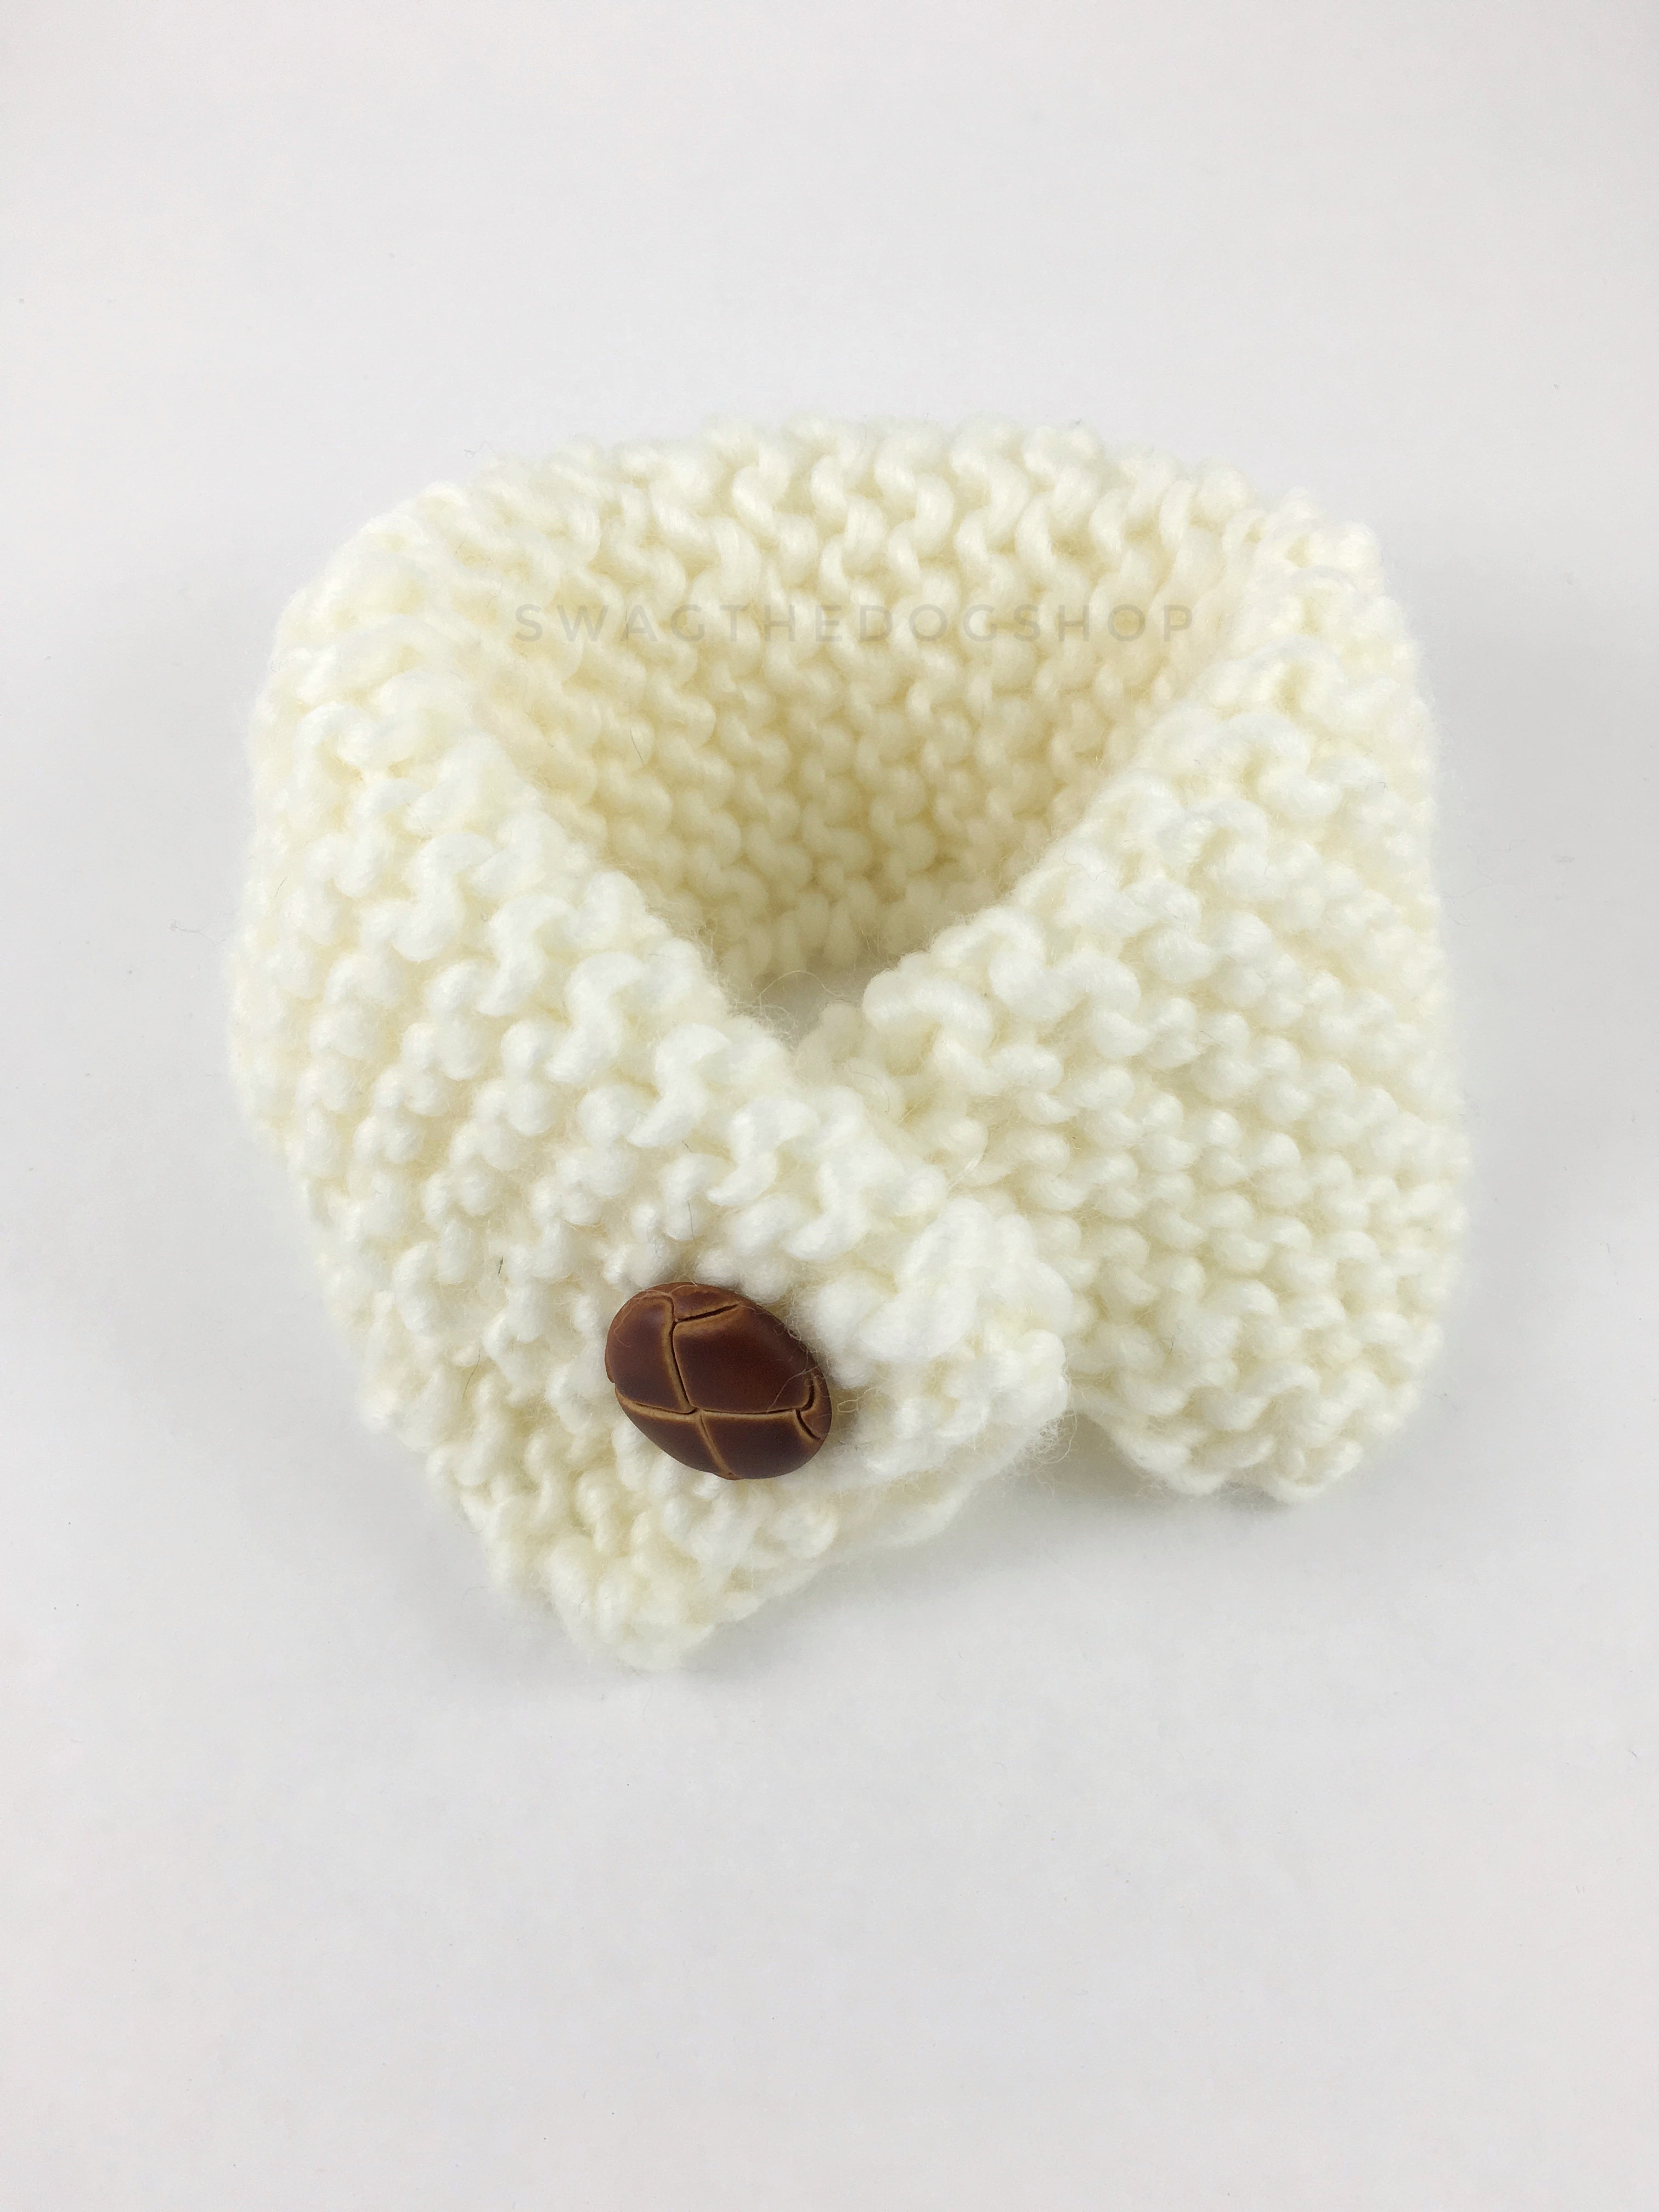 Winter Cream Swagsnood - Product Above View. Winter Cream Color Dog Snood with Accent Button